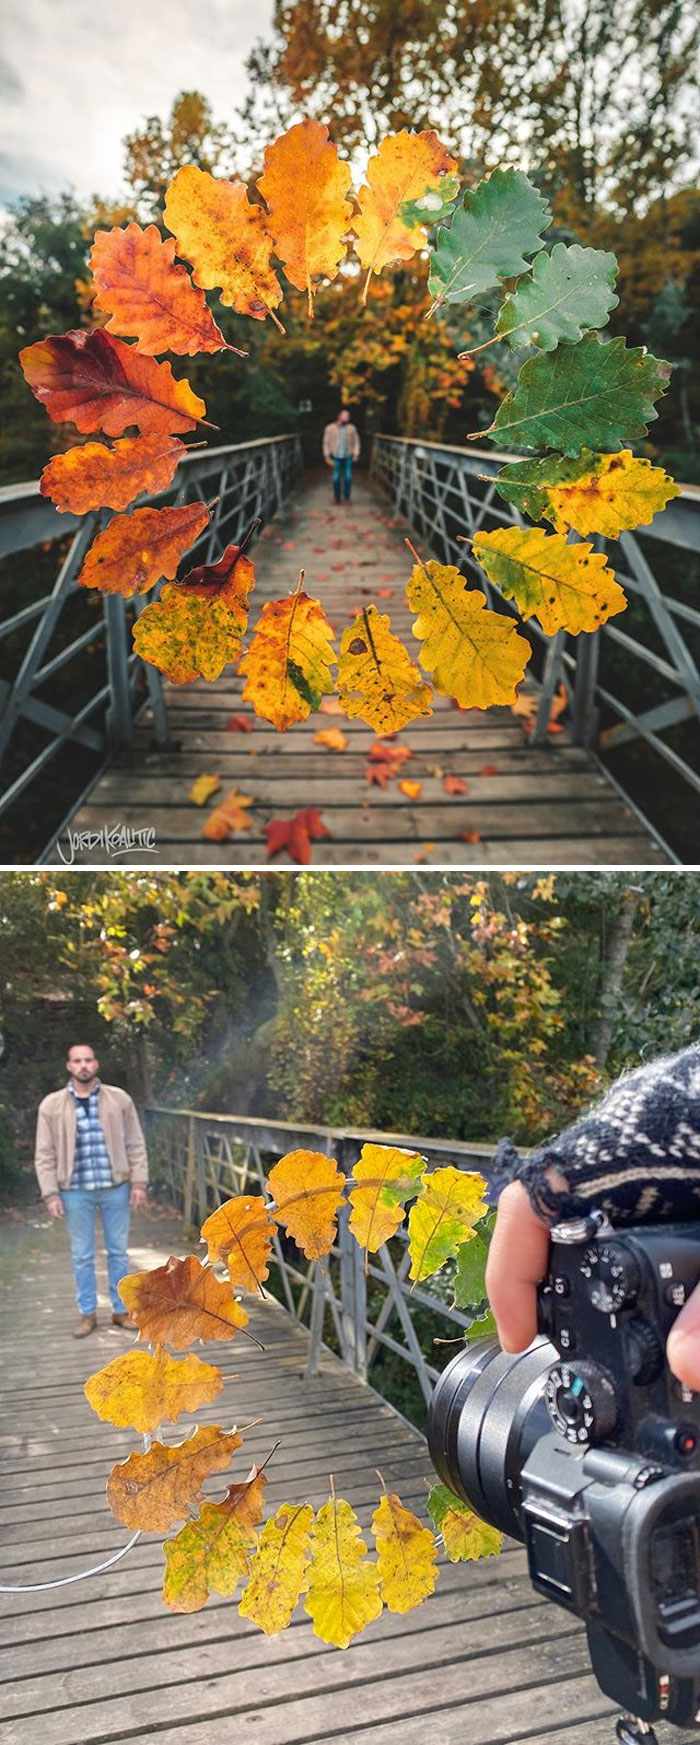 Photographer Reveals What Tricks He Uses To Get Interesting Photos In 30 Examples (New Pics)